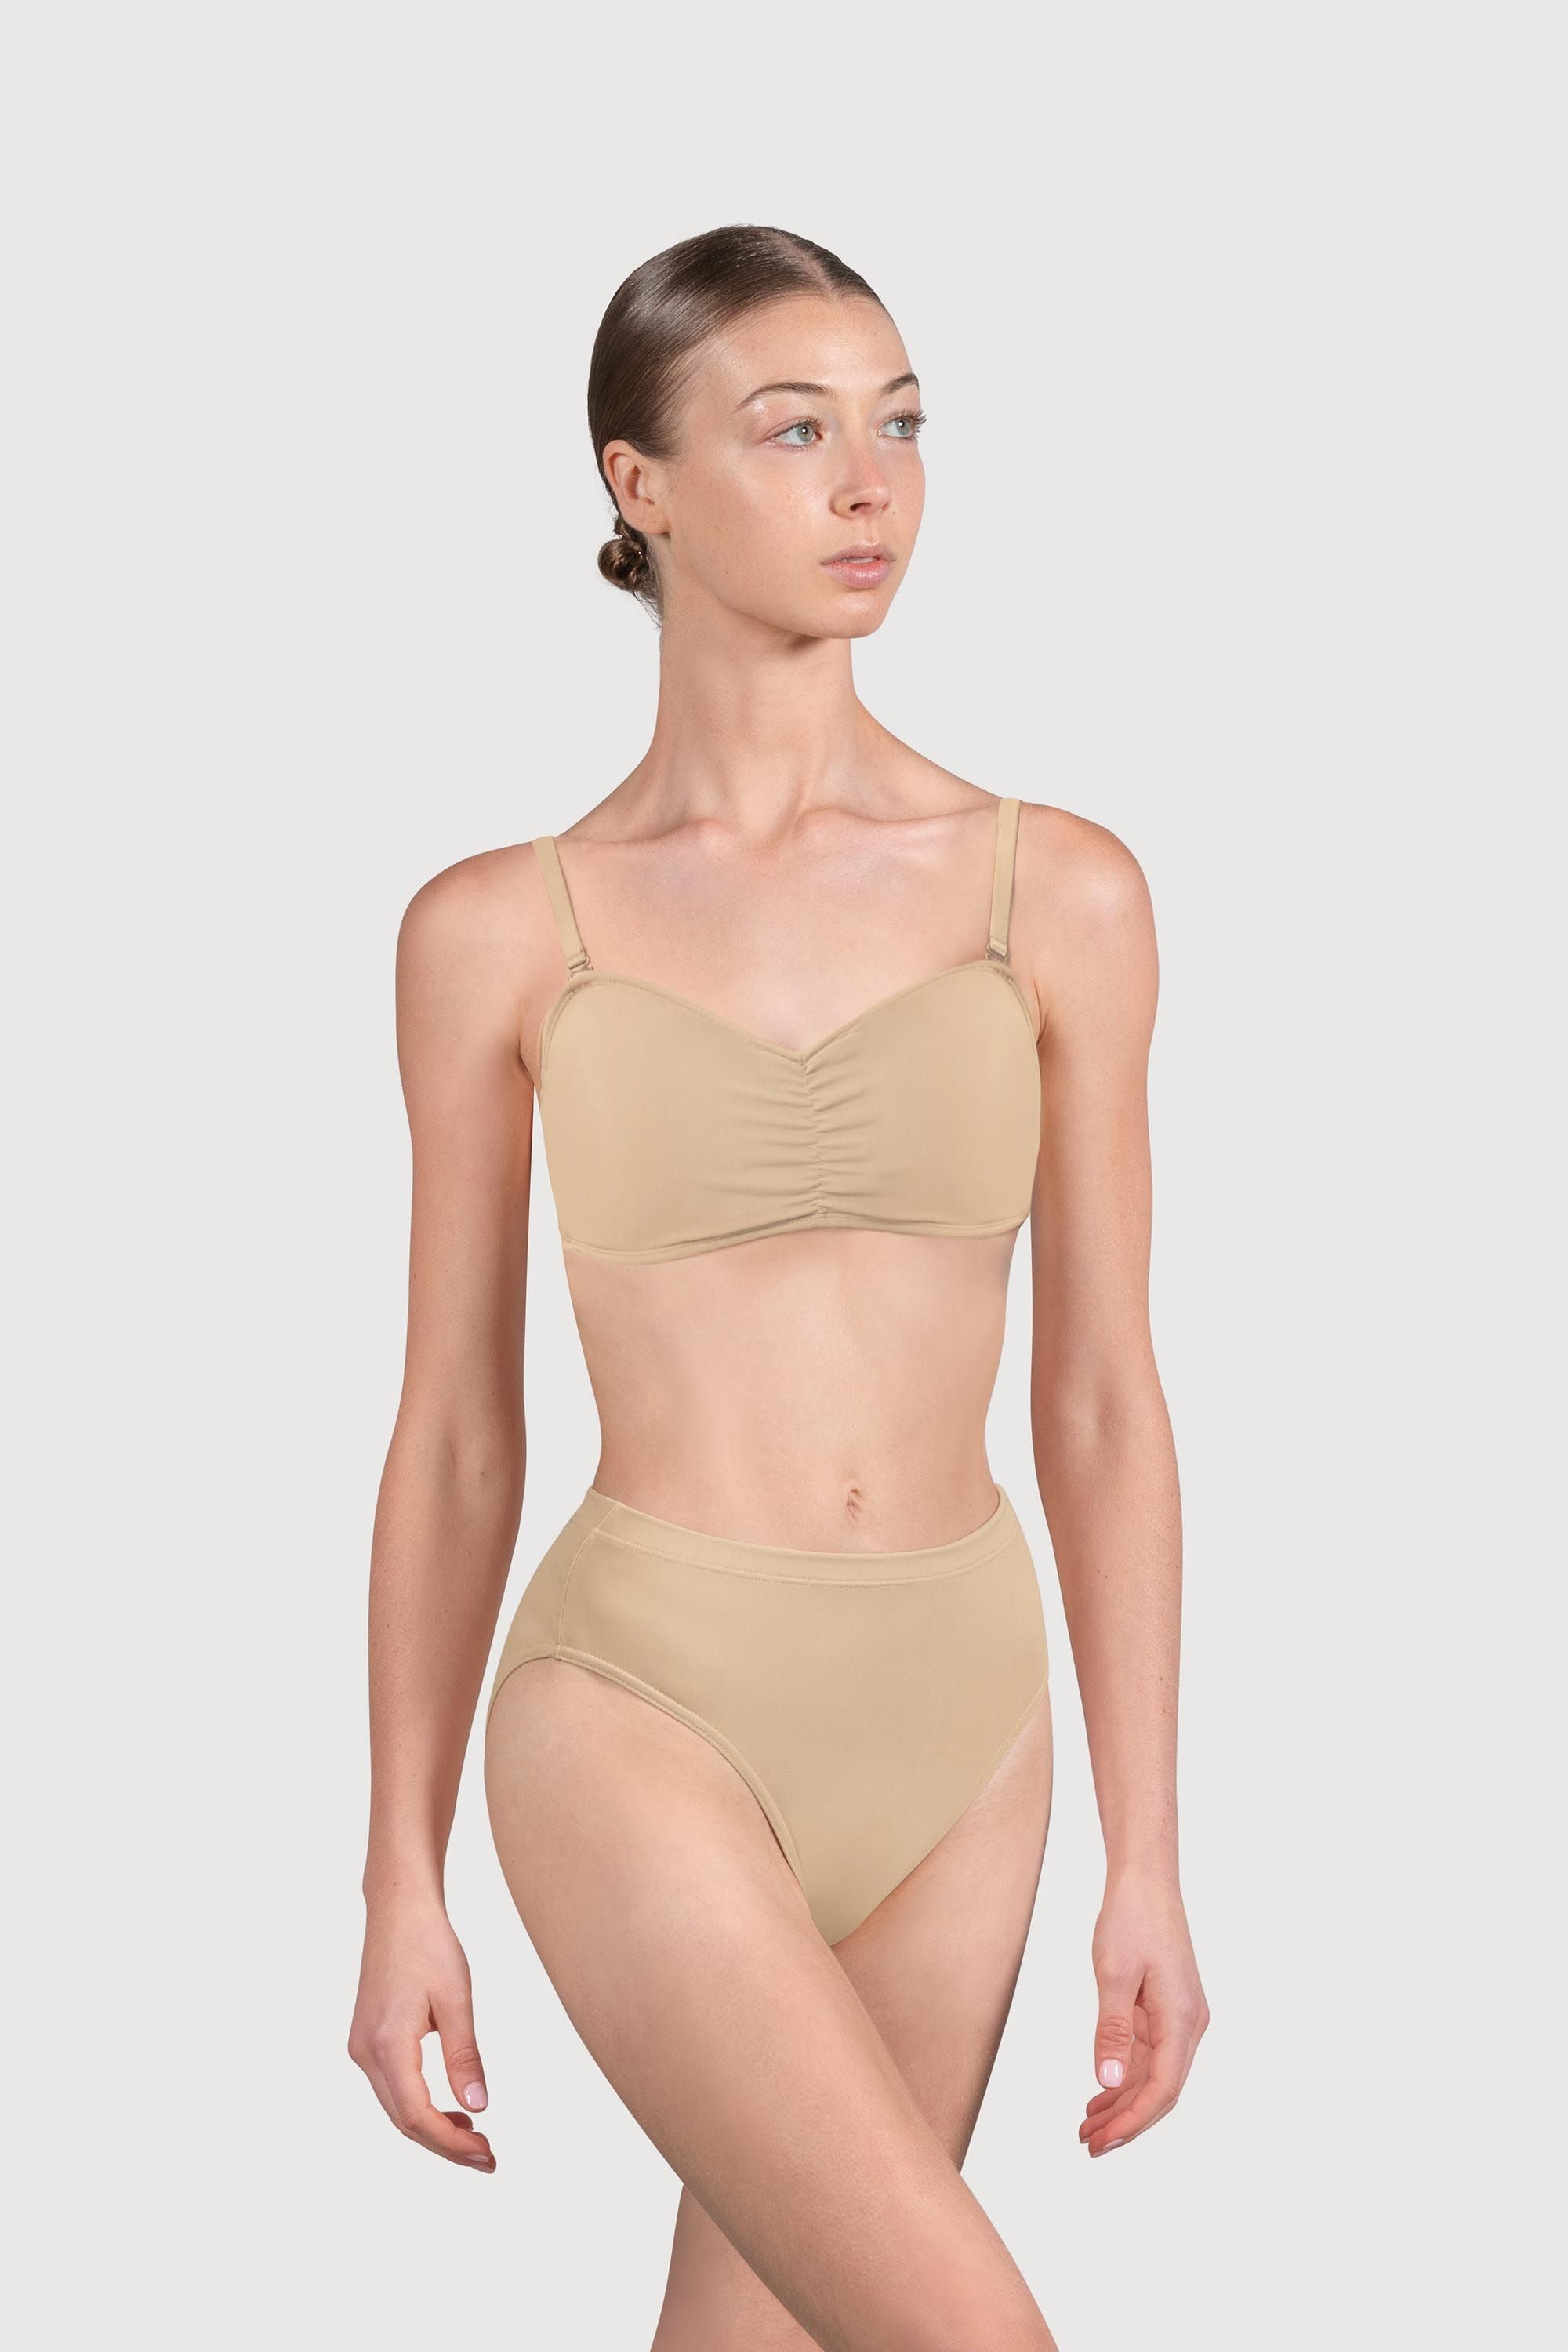 Small band, big cup size help: Trying dancewear!